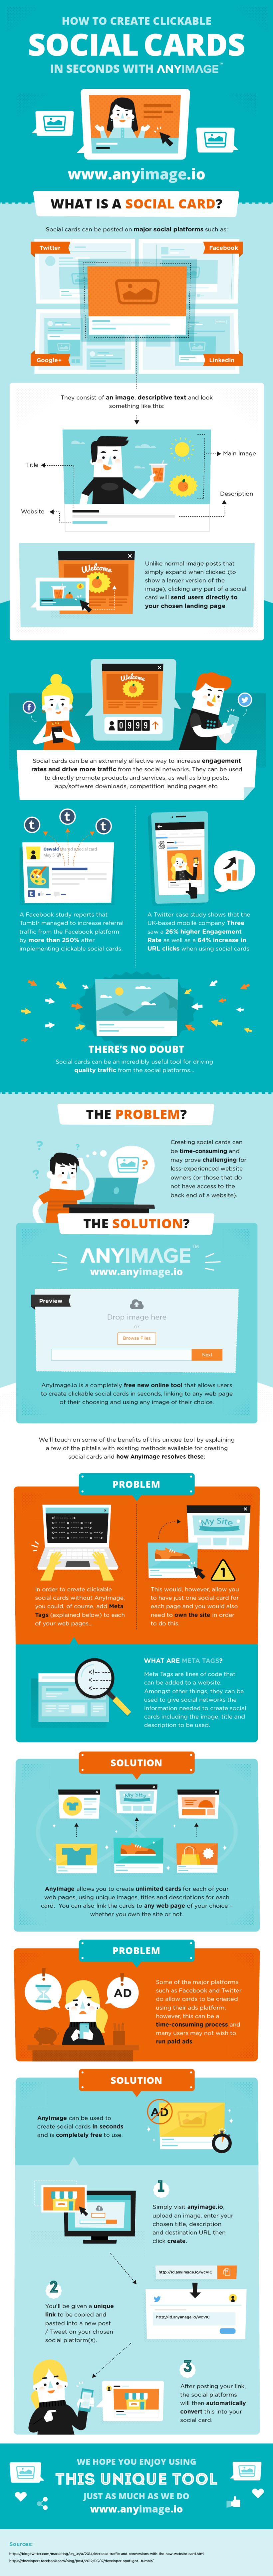 anyimage.io images to social cards infographic